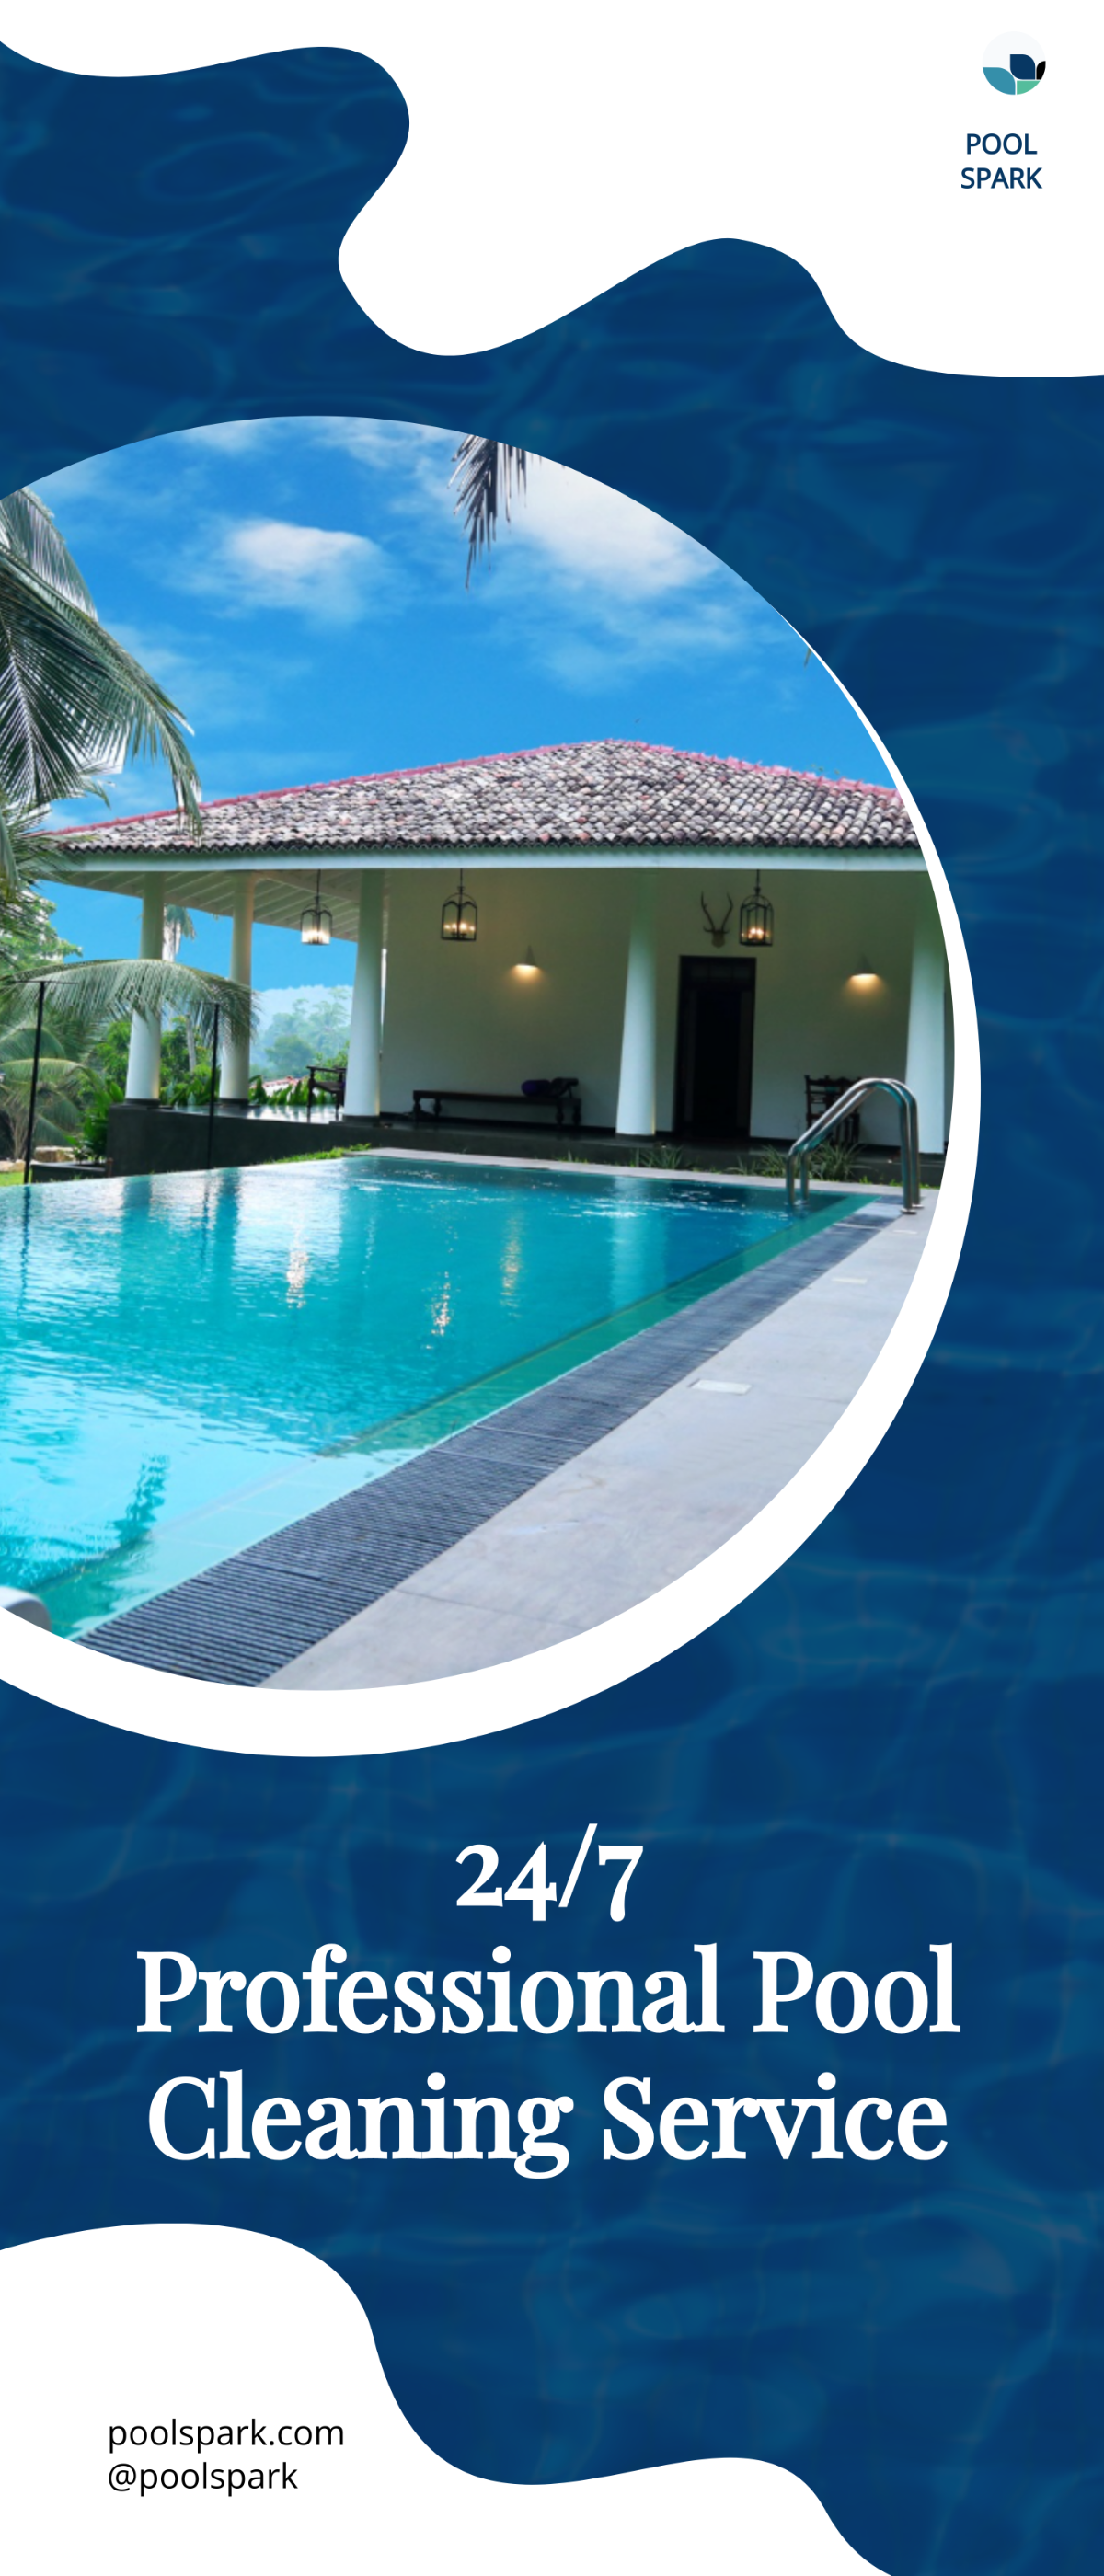 Swimming Pool Cleaning Service Roll Up Banner